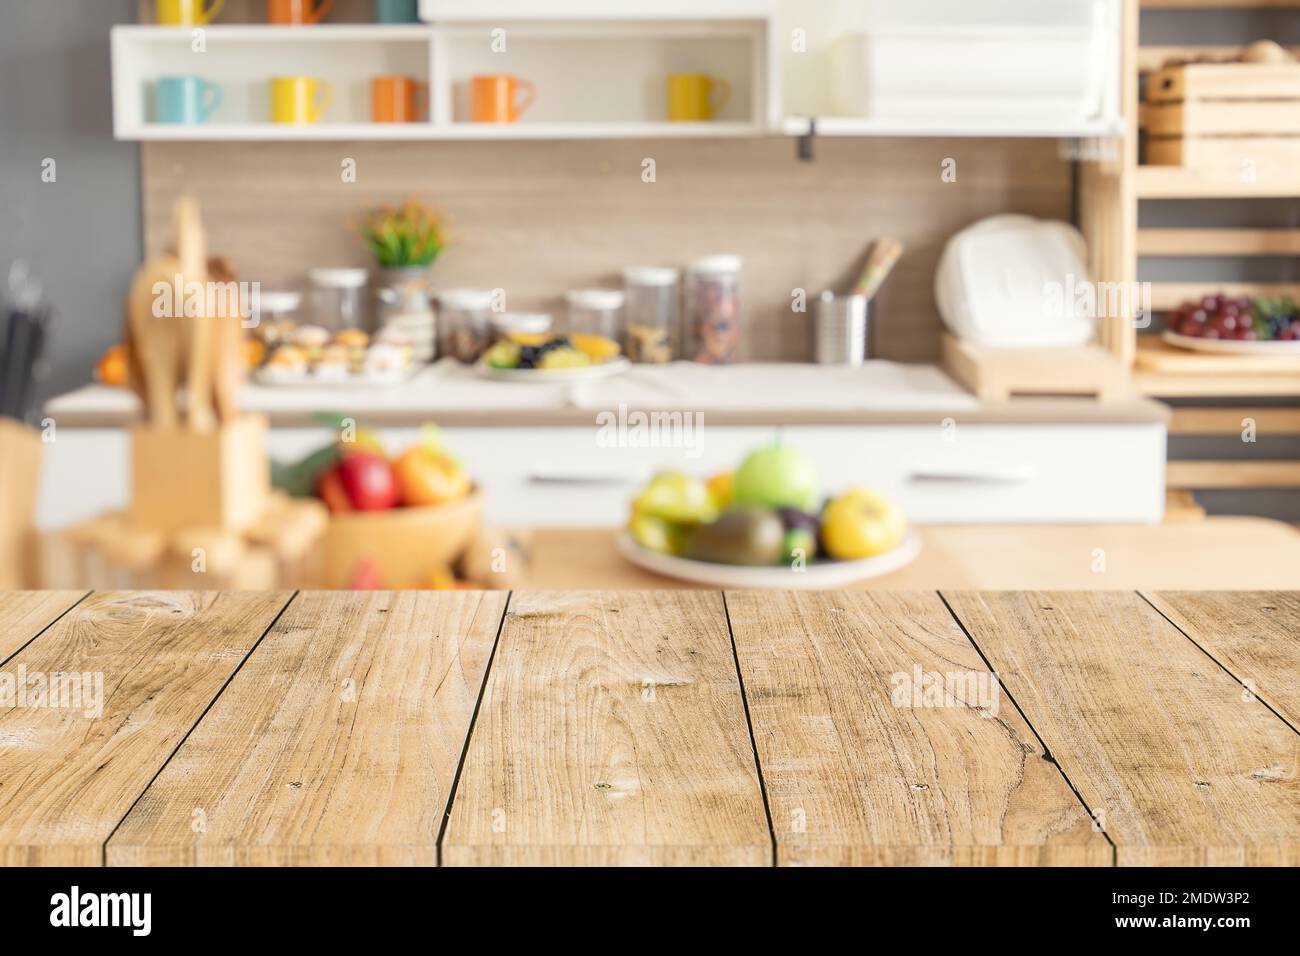 Wood table top with blur kitchen counter decoration for montage product display. background for cooking food layout concept. Stock Photo